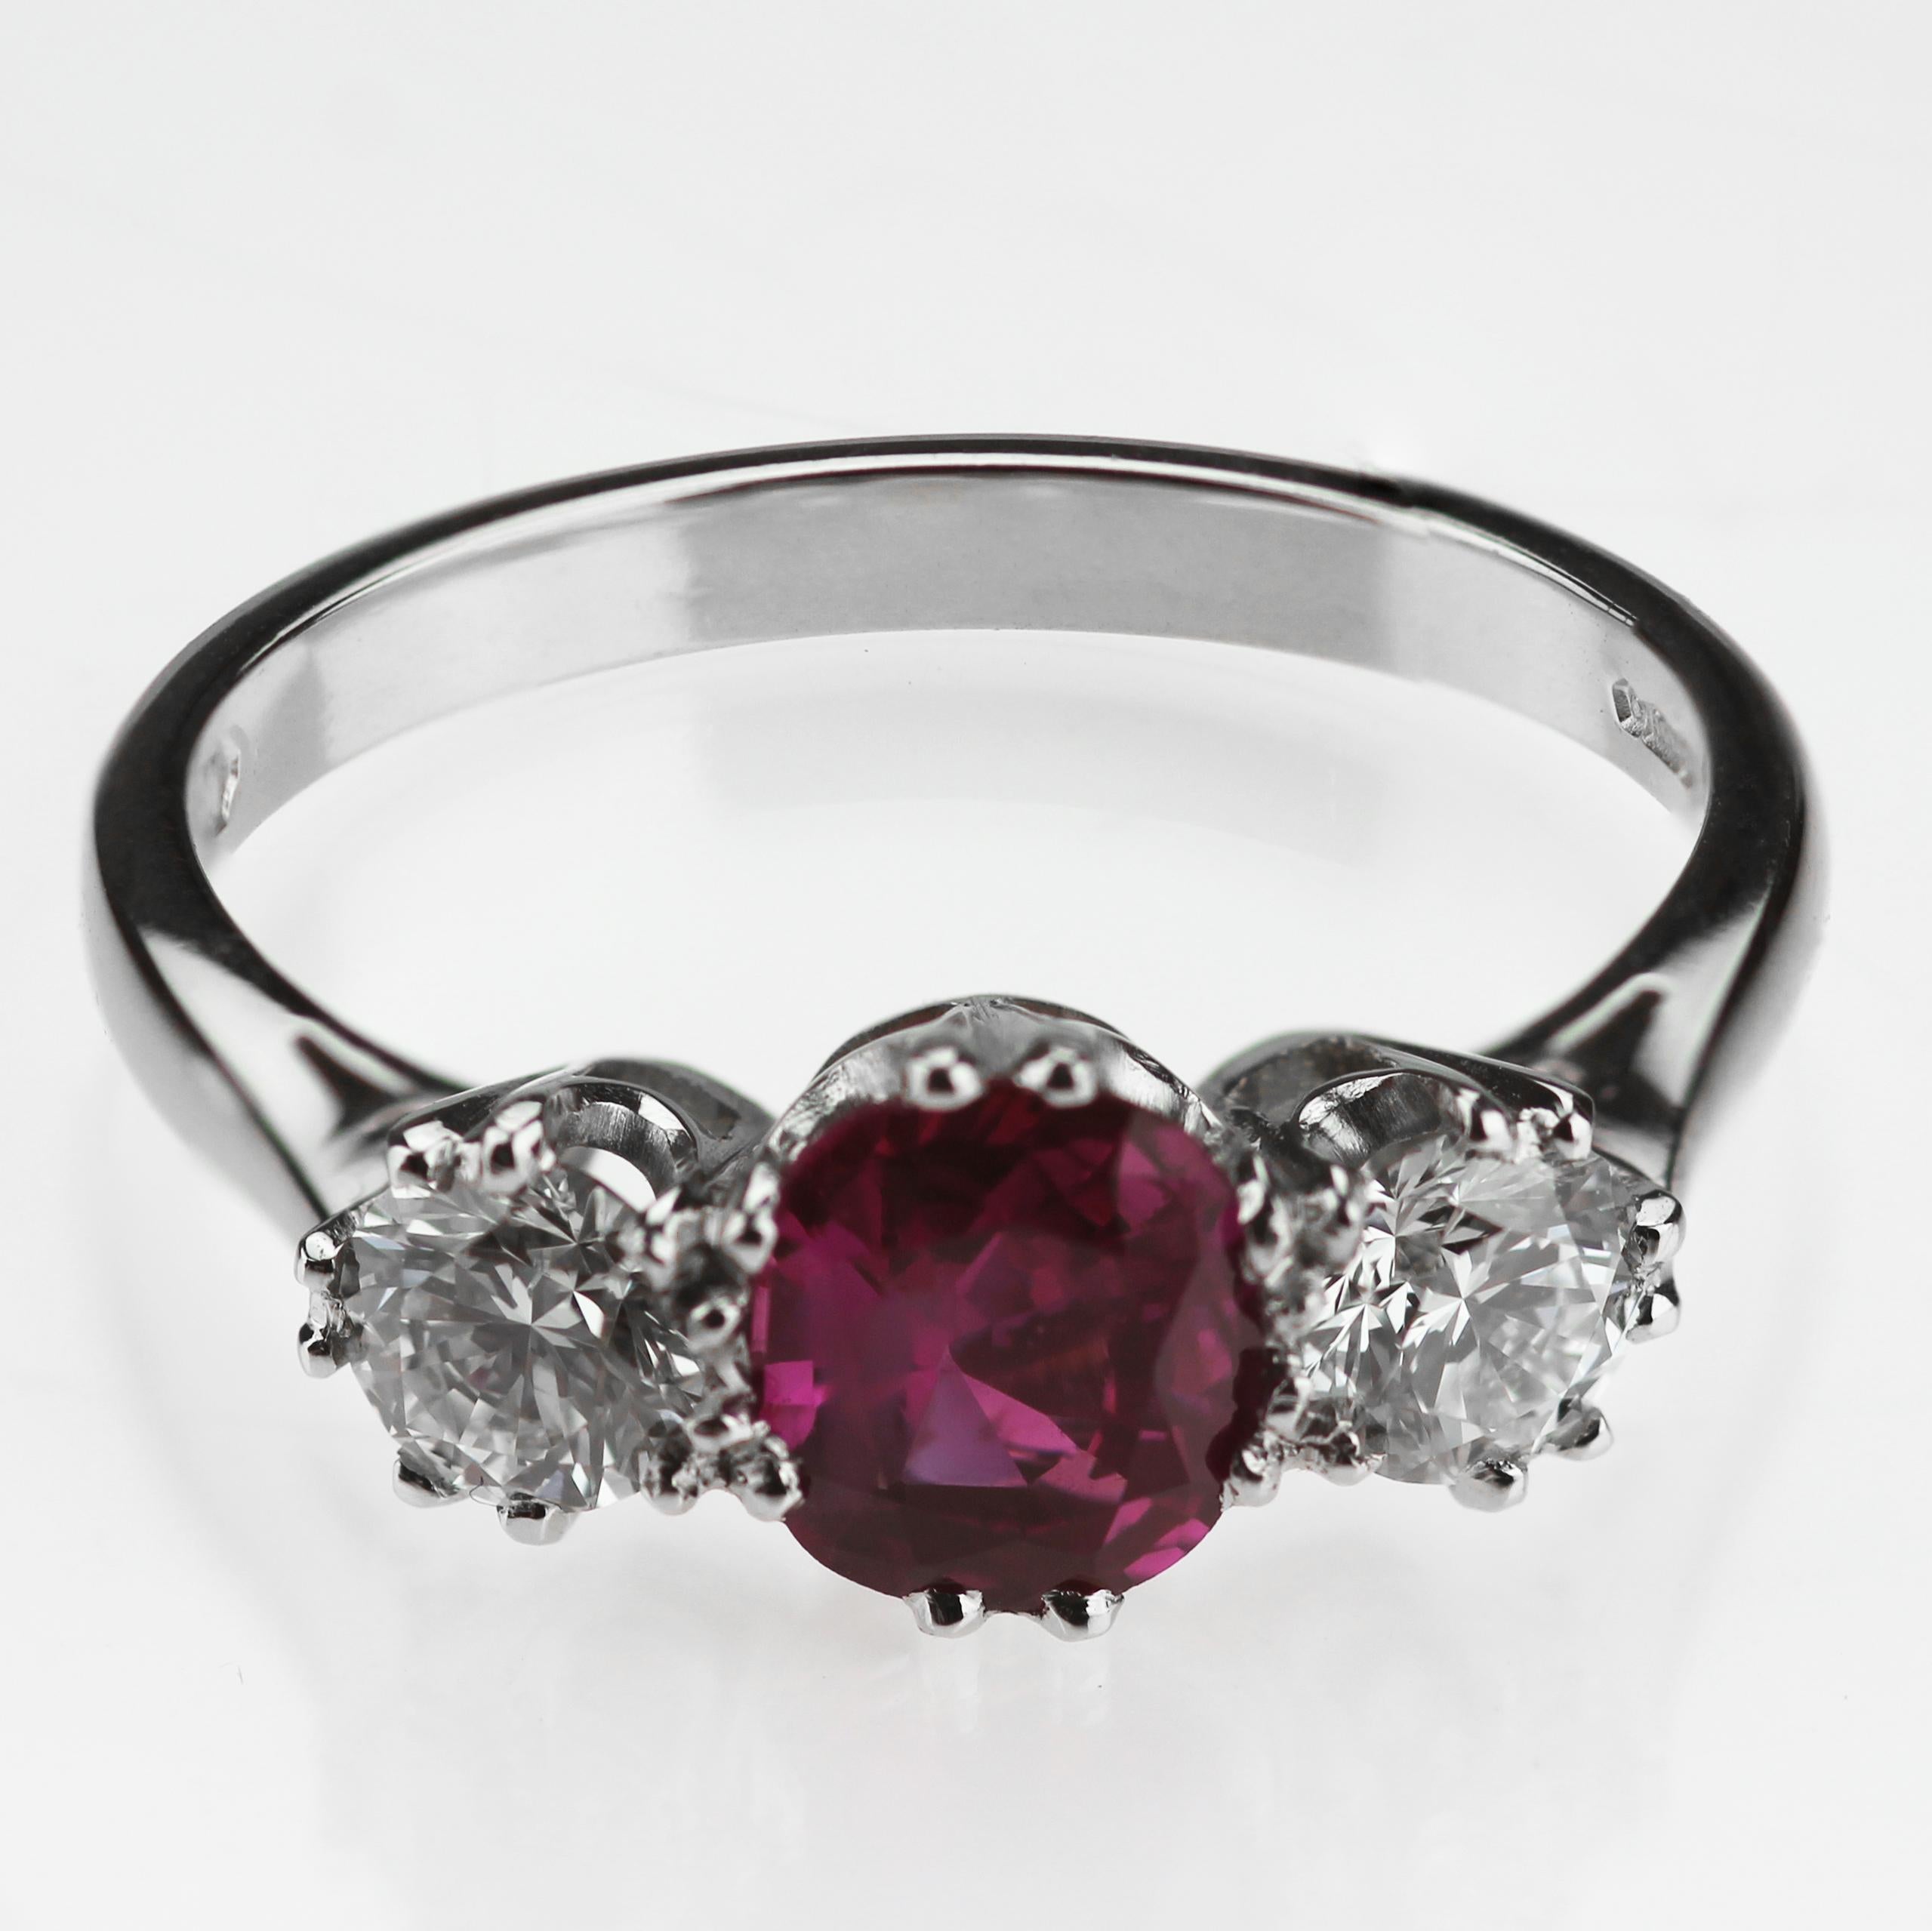 Certified Natural Burmese ruby and round brilliant cut diamond ring. Two brilliant cut diamonds -glistening and glowing on each sides of the ruby to complement the beautiful colour of the ruby set in platinum.
UK ring size 